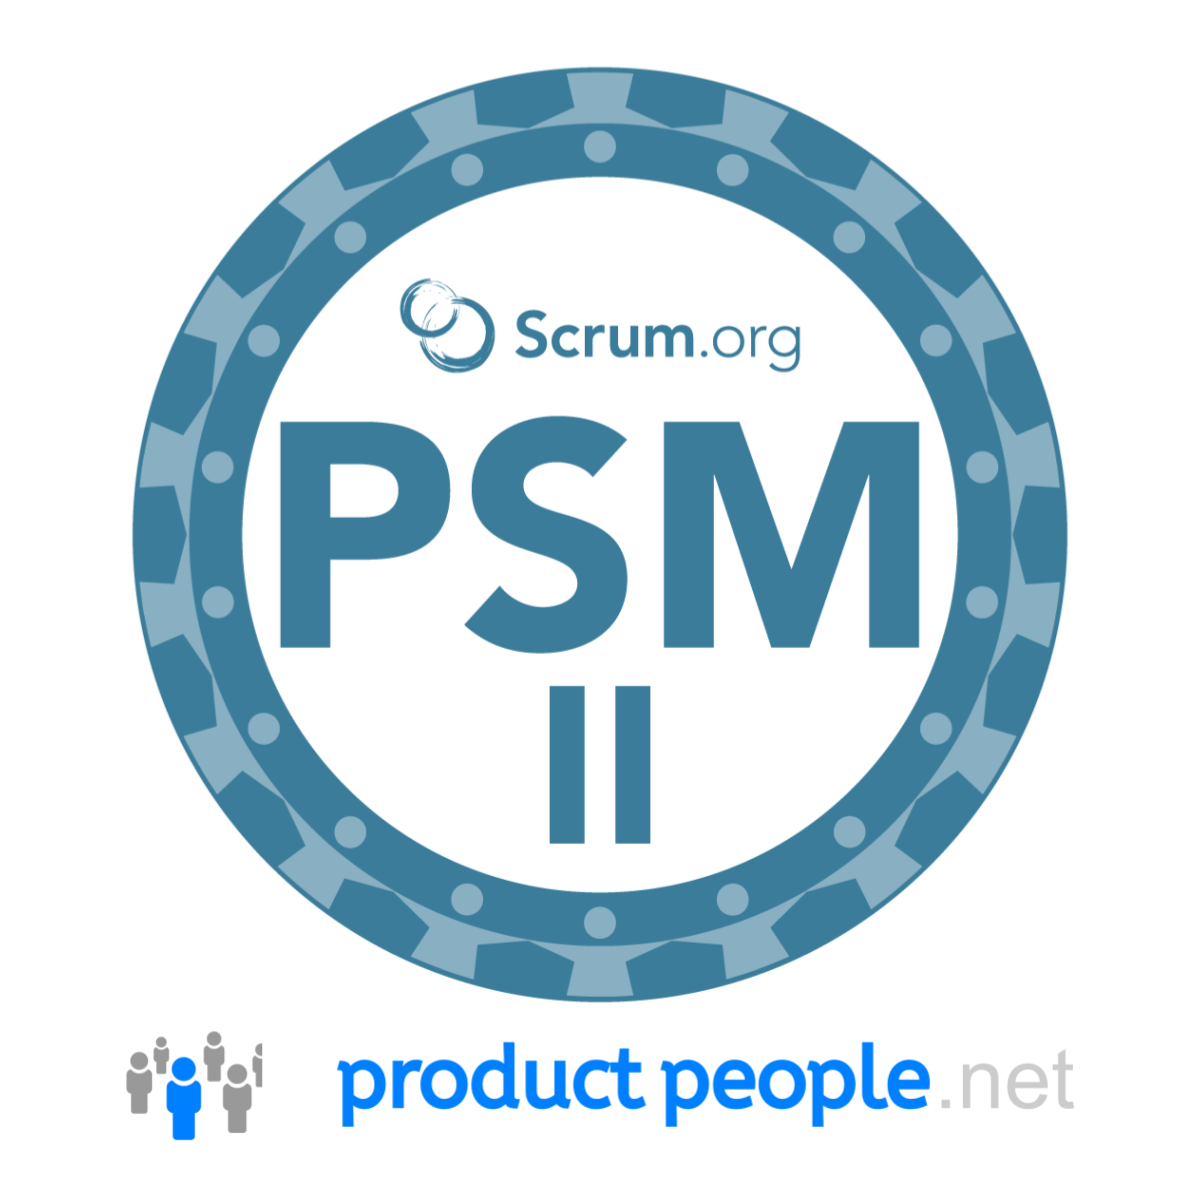 PSM II - Professional Scrum Master II - Scrum.org - powered by productpeople.net